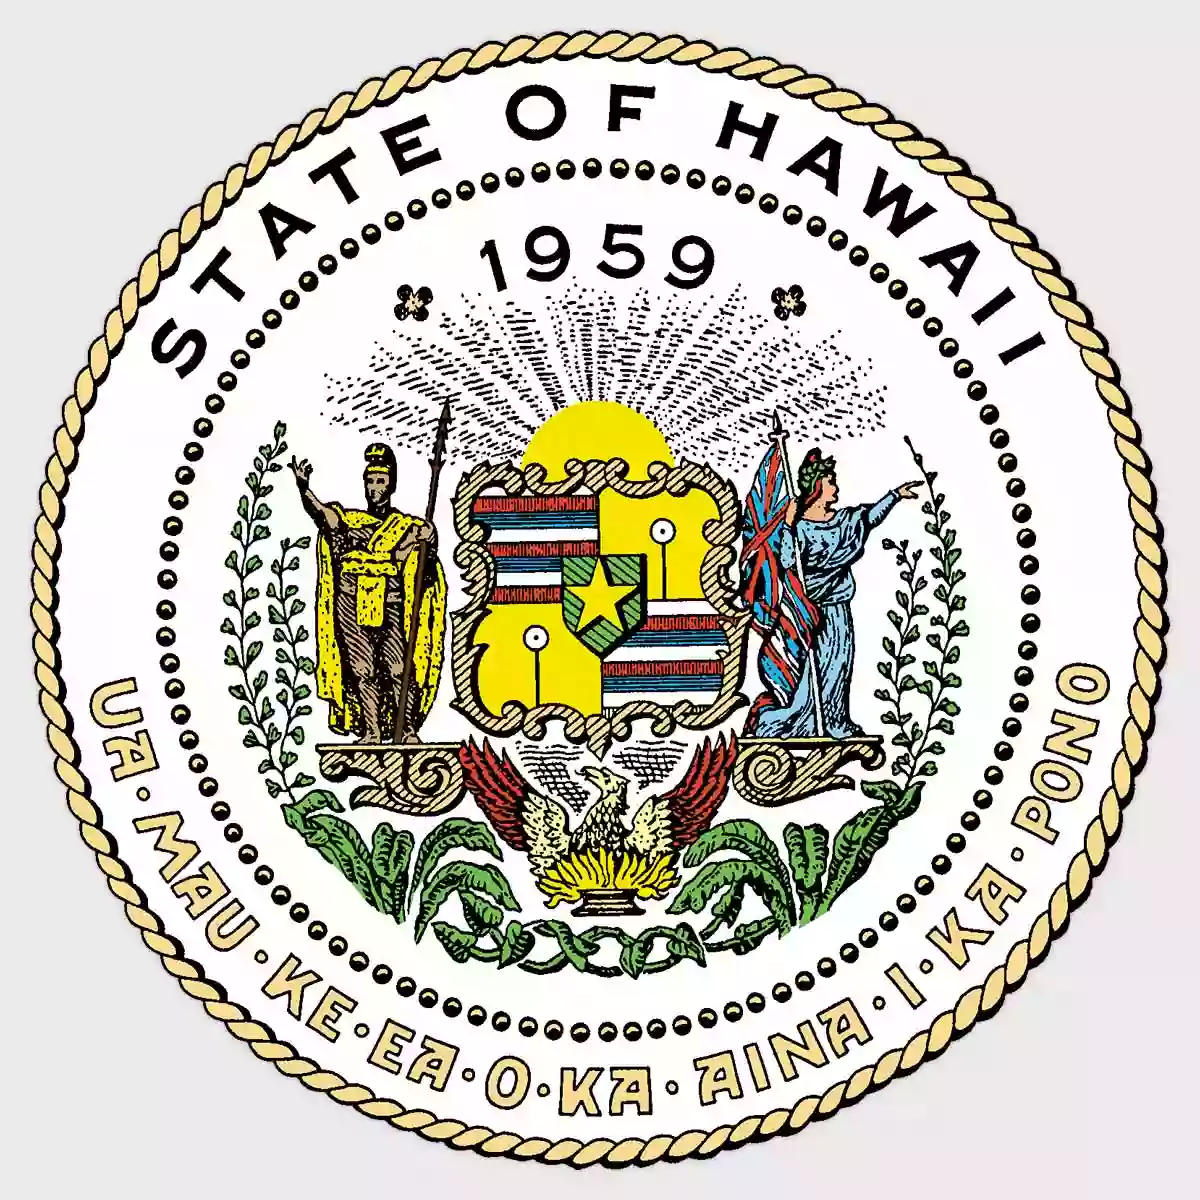 State of Hawaii, Department of Health - Hawaii Family Guidance Center